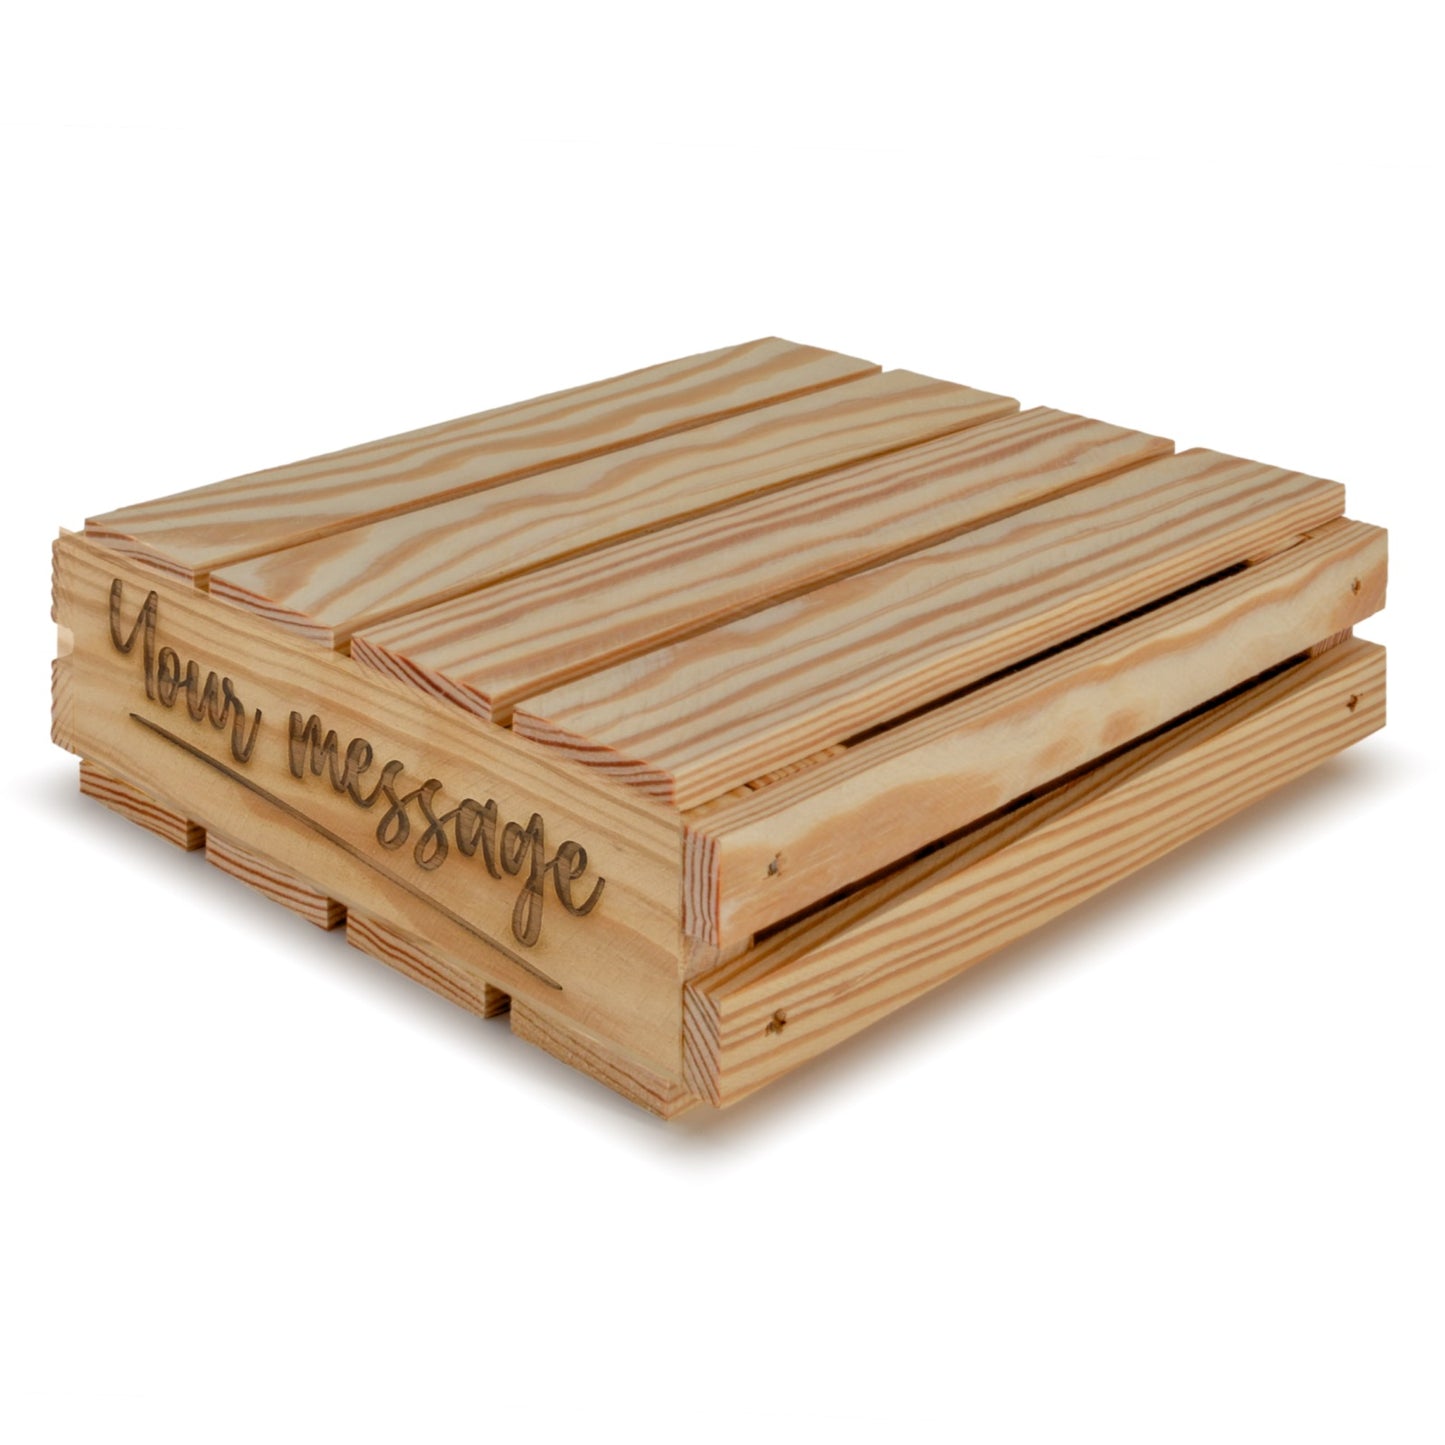 Small wooden crates with lid and your custom message 8x8x2.5 , 6-SS-8-8-2.5-ST-NW-LL, 12-SS-8-8-2.5-ST-NW-LL, 24-SS-8-8-2.5-ST-NW-LL, 48-SS-8-8-2.5-ST-NW-LL, 96-SS-8-8-2.5-ST-NW-LL